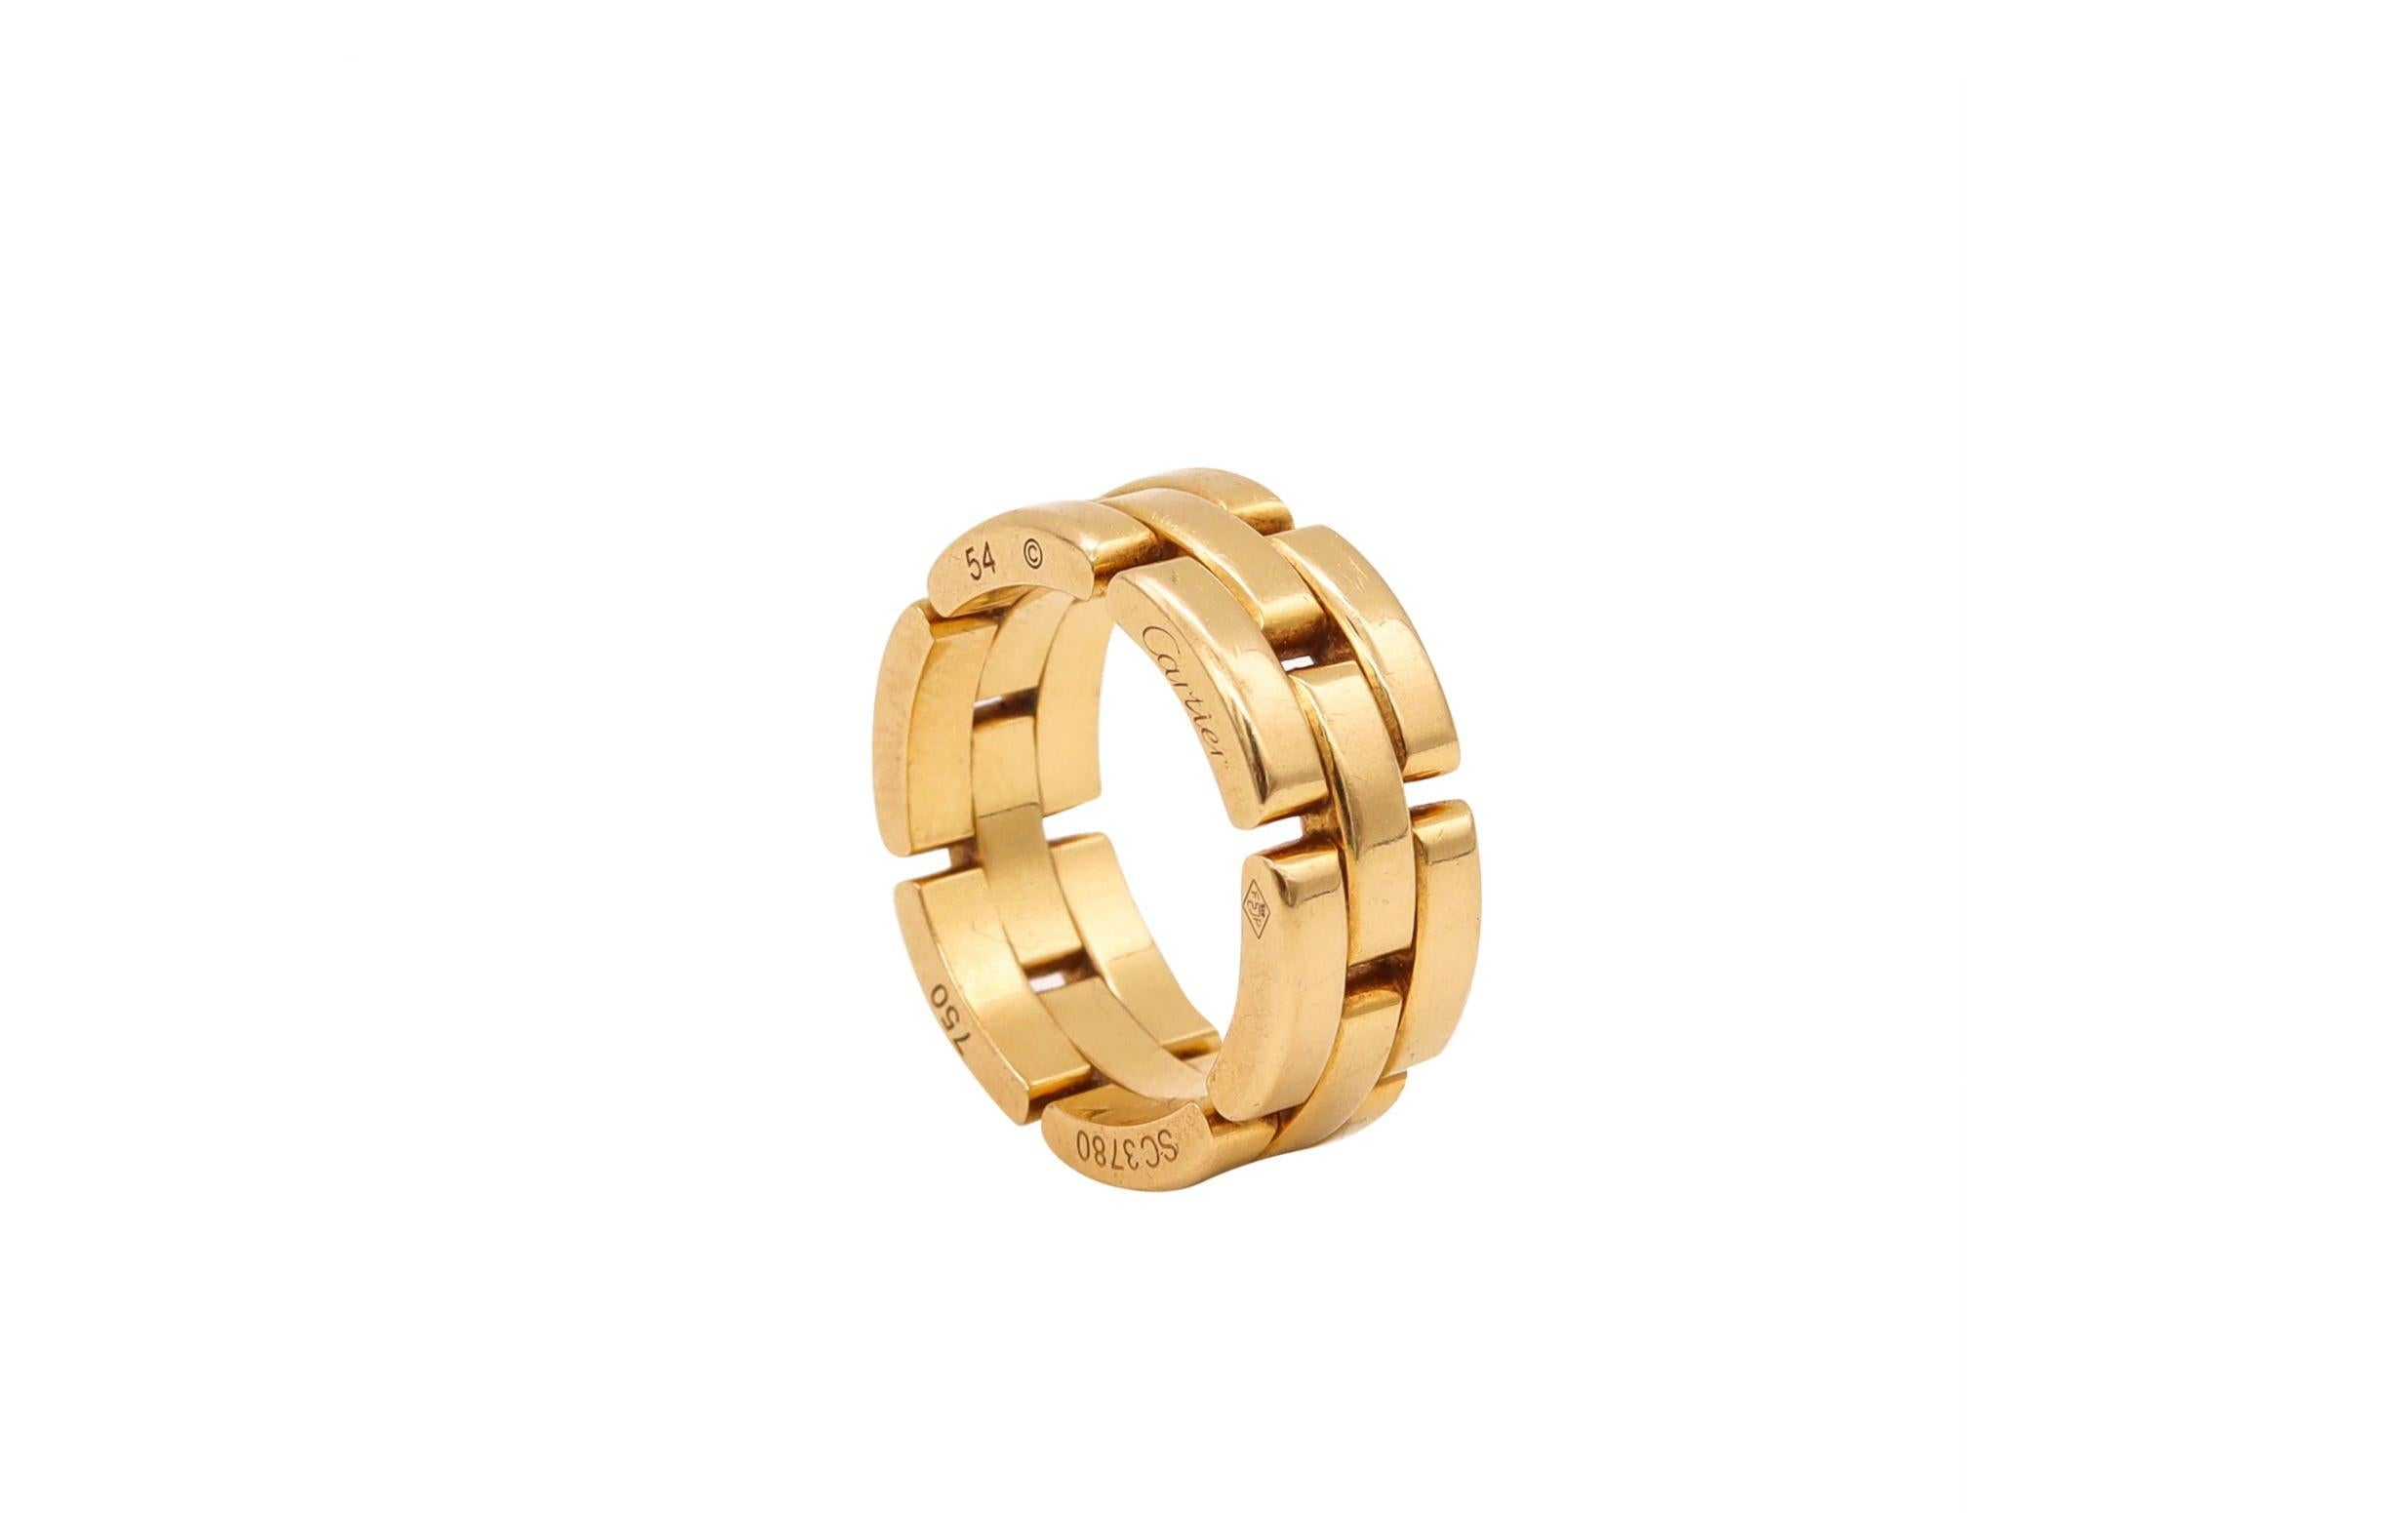 Cartier Paris Modern Maillon Panthere Ring Band in Solid 18 Karat Yellow Gold 2